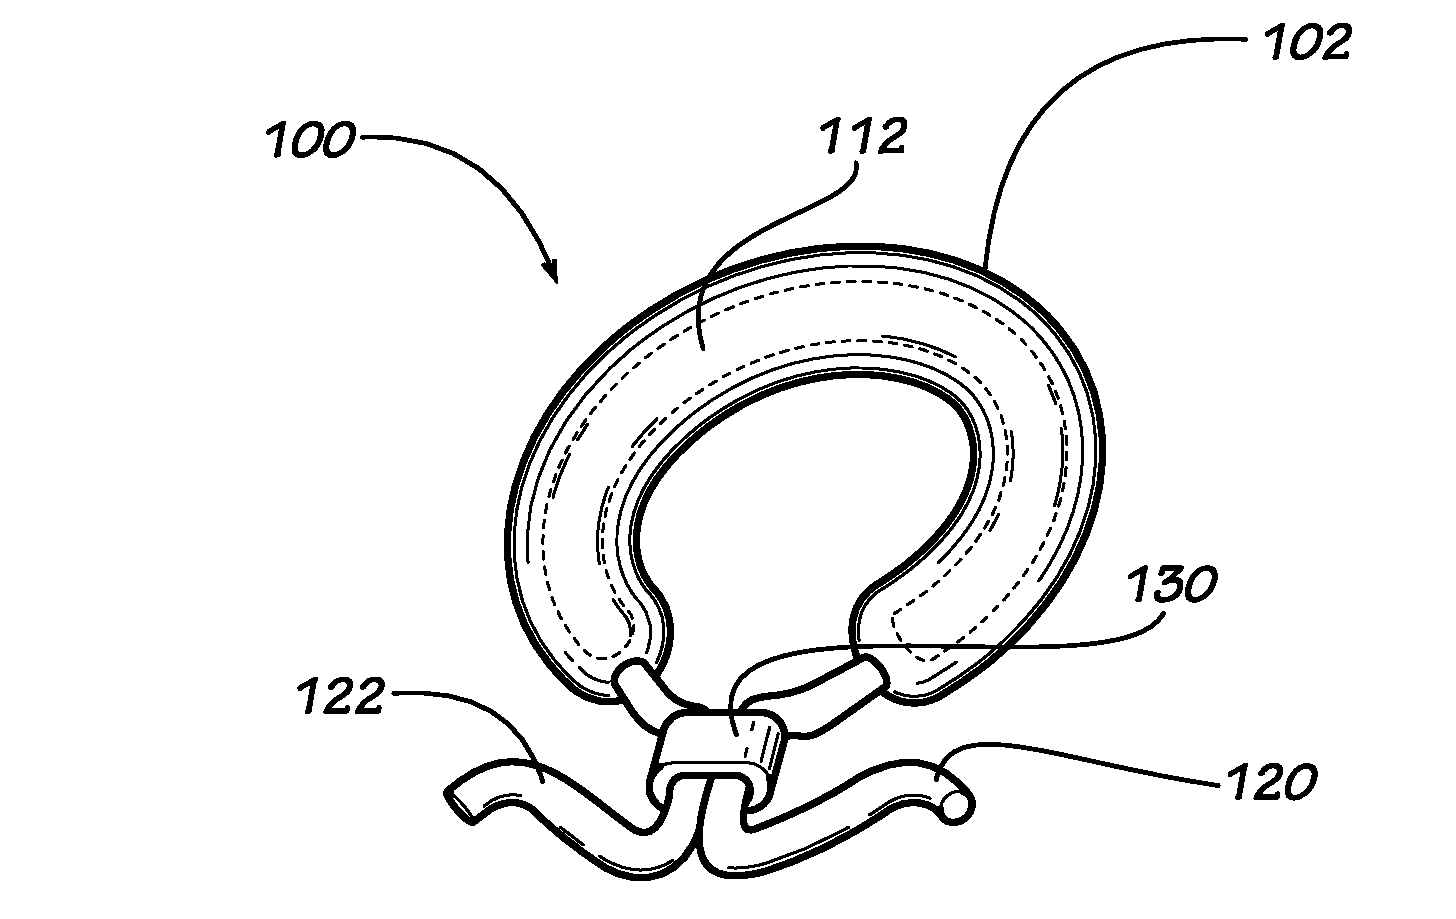 Implantable drug delivery devices for genitourinary sites